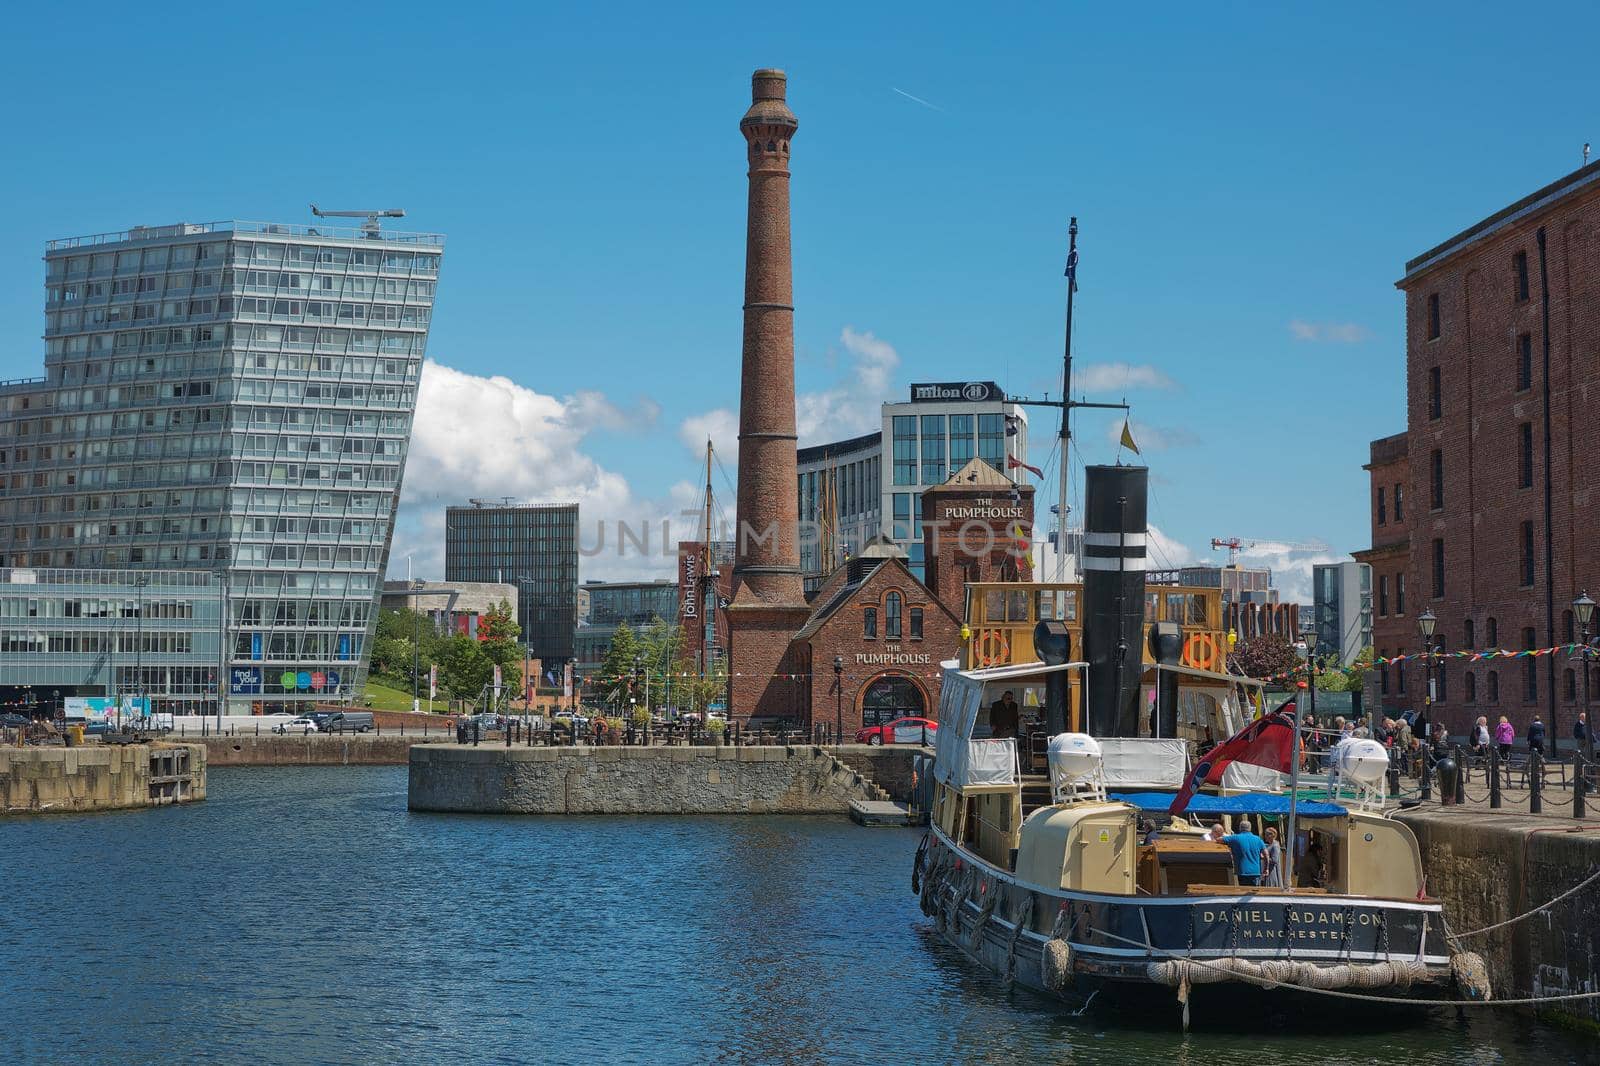 View of Albert Dock in Liverpool, England. The Albert Dock is a complex of dock buildings and warehouses. by wondry